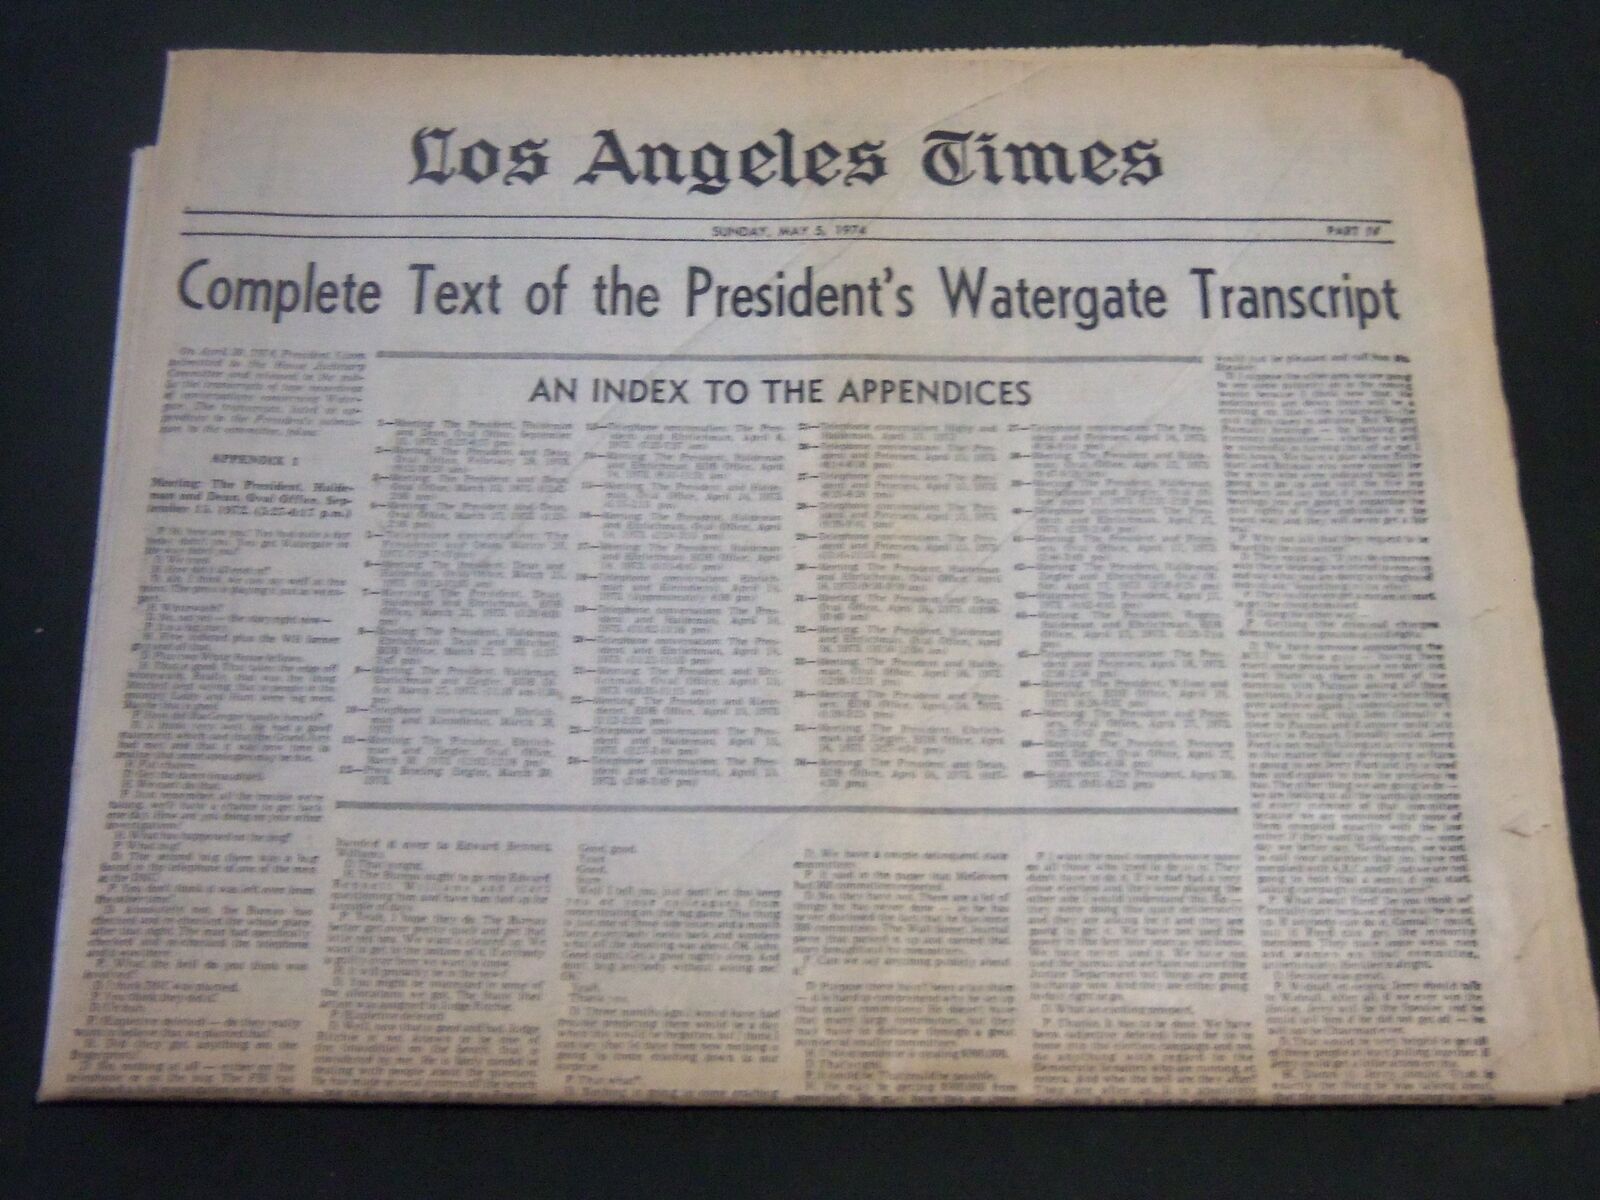 1974 MAY 5 LOS ANGELES TIMES - PRESIDENT WATERGATE TRANSCRIPT COMPLETE - NP 2414